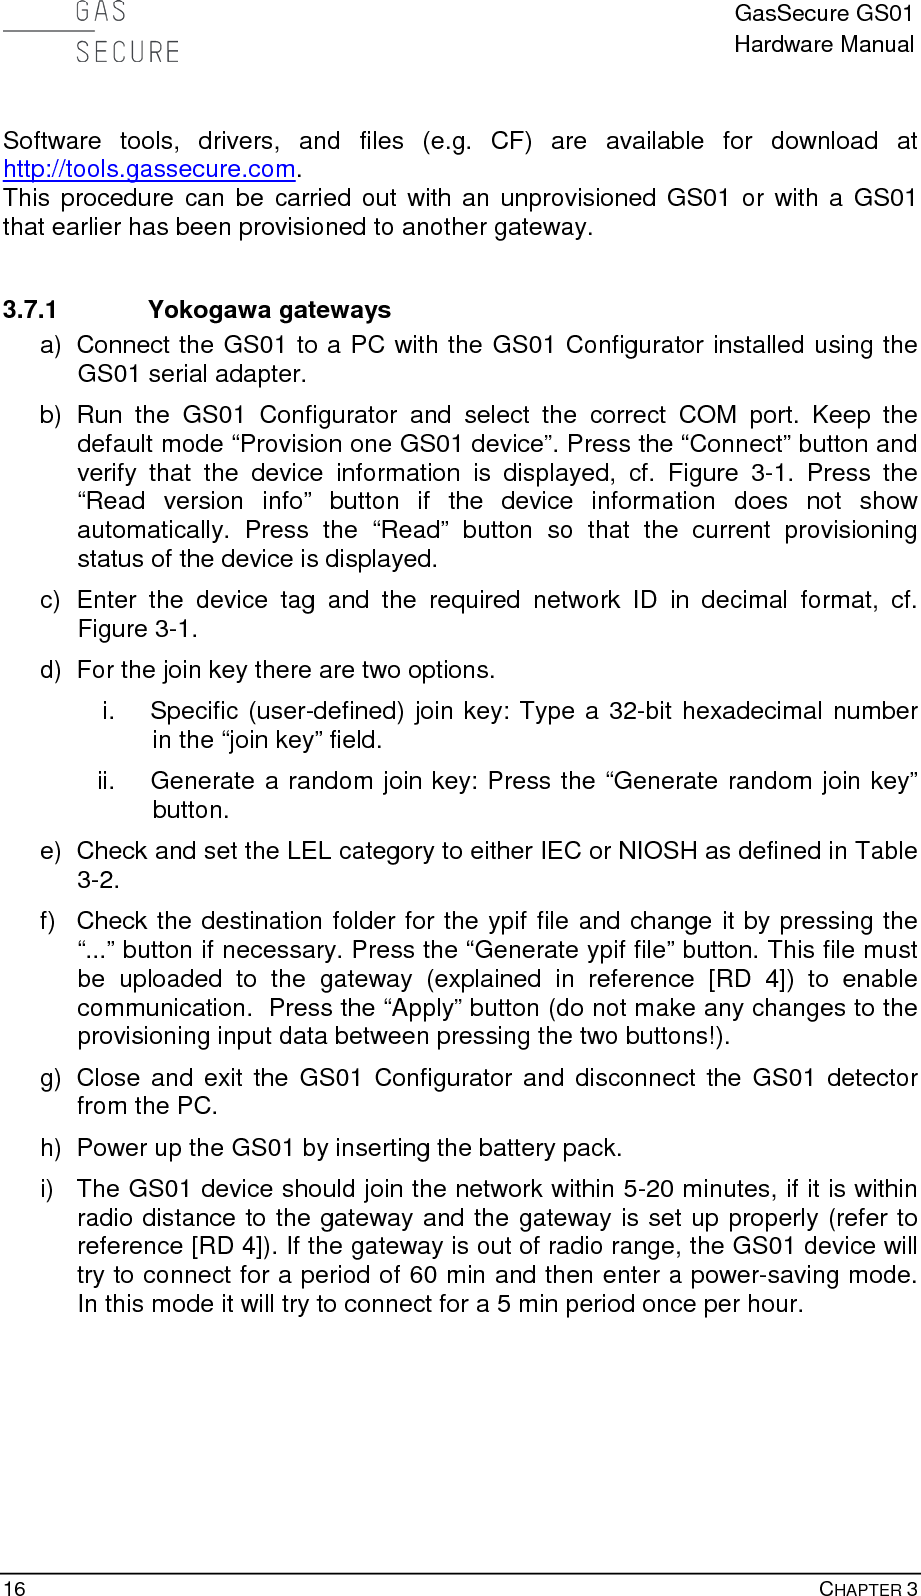  GasSecure GS01 Hardware Manual  16    CHAPTER 3  Software tools, drivers, and files (e.g. CF) are available for download at http://tools.gassecure.com. This procedure can be carried out with an unprovisioned GS01 or with a GS01 that earlier has been provisioned to another gateway.  3.7.1 Yokogawa gateways a) Connect the GS01 to a PC with the GS01 Configurator installed using the GS01 serial adapter.  b) Run the GS01 Configurator and select the correct COM port. Keep the default mode “Provision one GS01 device”. Press the “Connect” button and verify that the device information is displayed, cf. Figure  3-1.  Press the “Read version info” button if the device information does not show automatically. Press the “Read” button so that the current provisioning status of the device is displayed. c)  Enter  the device tag and  the required network ID  in  decimal format, cf. Figure 3-1. d) For the join key there are two options. i. Specific (user-defined) join key: Type a 32-bit hexadecimal number in the “join key” field. ii. Generate a random join key: Press the “Generate random join key” button. e) Check and set the LEL category to either IEC or NIOSH as defined in Table 3-2. f) Check the destination folder for the ypif file and change it by pressing the “...” button if necessary. Press the “Generate ypif file” button. This file must be uploaded to the gateway (explained in reference [RD 4]) to enable communication.  Press the “Apply” button (do not make any changes to the provisioning input data between pressing the two buttons!). g) Close and exit the GS01 Configurator and disconnect the GS01 detector from the PC. h) Power up the GS01 by inserting the battery pack. i) The GS01 device should join the network within 5-20 minutes, if it is within radio distance to the gateway and the gateway is set up properly (refer to reference [RD 4]). If the gateway is out of radio range, the GS01 device will try to connect for a period of 60 min and then enter a power-saving mode. In this mode it will try to connect for a 5 min period once per hour.   